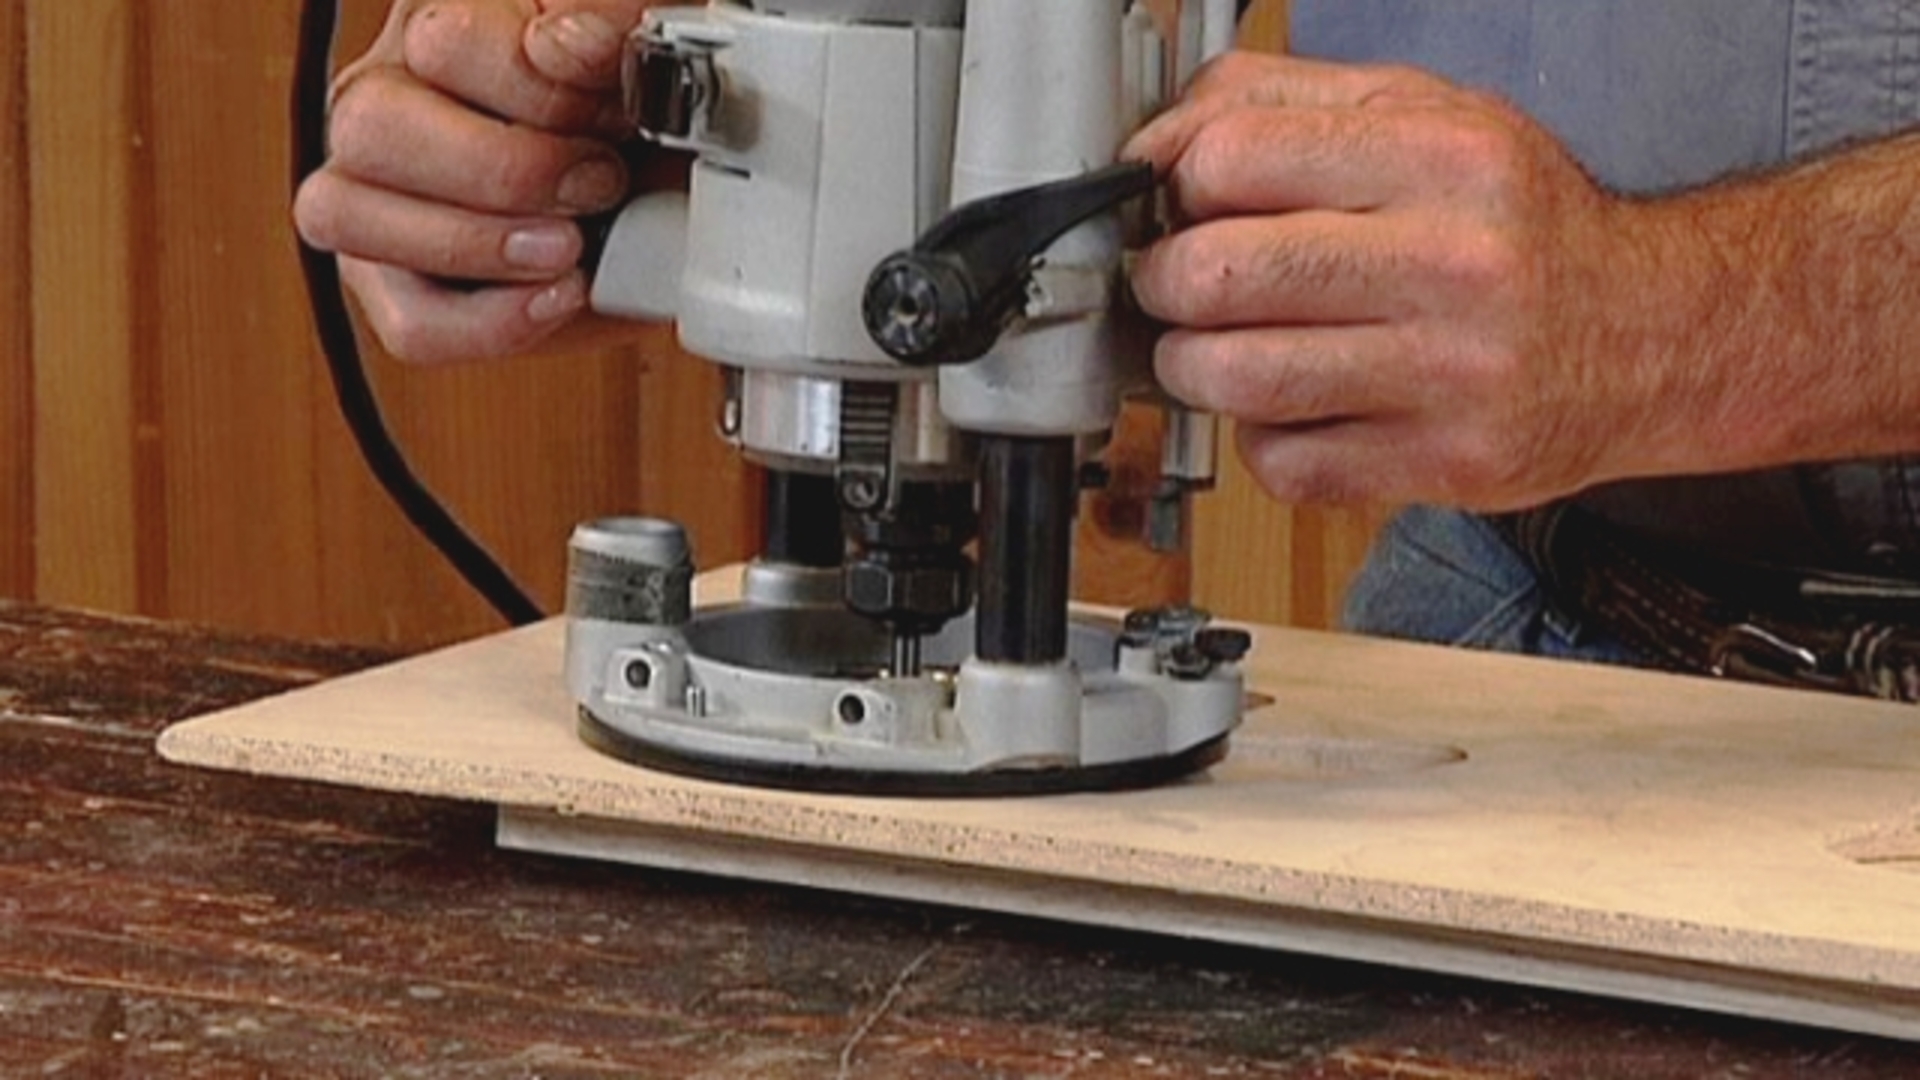 VIDEO: Tips for Making Router Templates - Woodworking, Blog, Videos, Plans